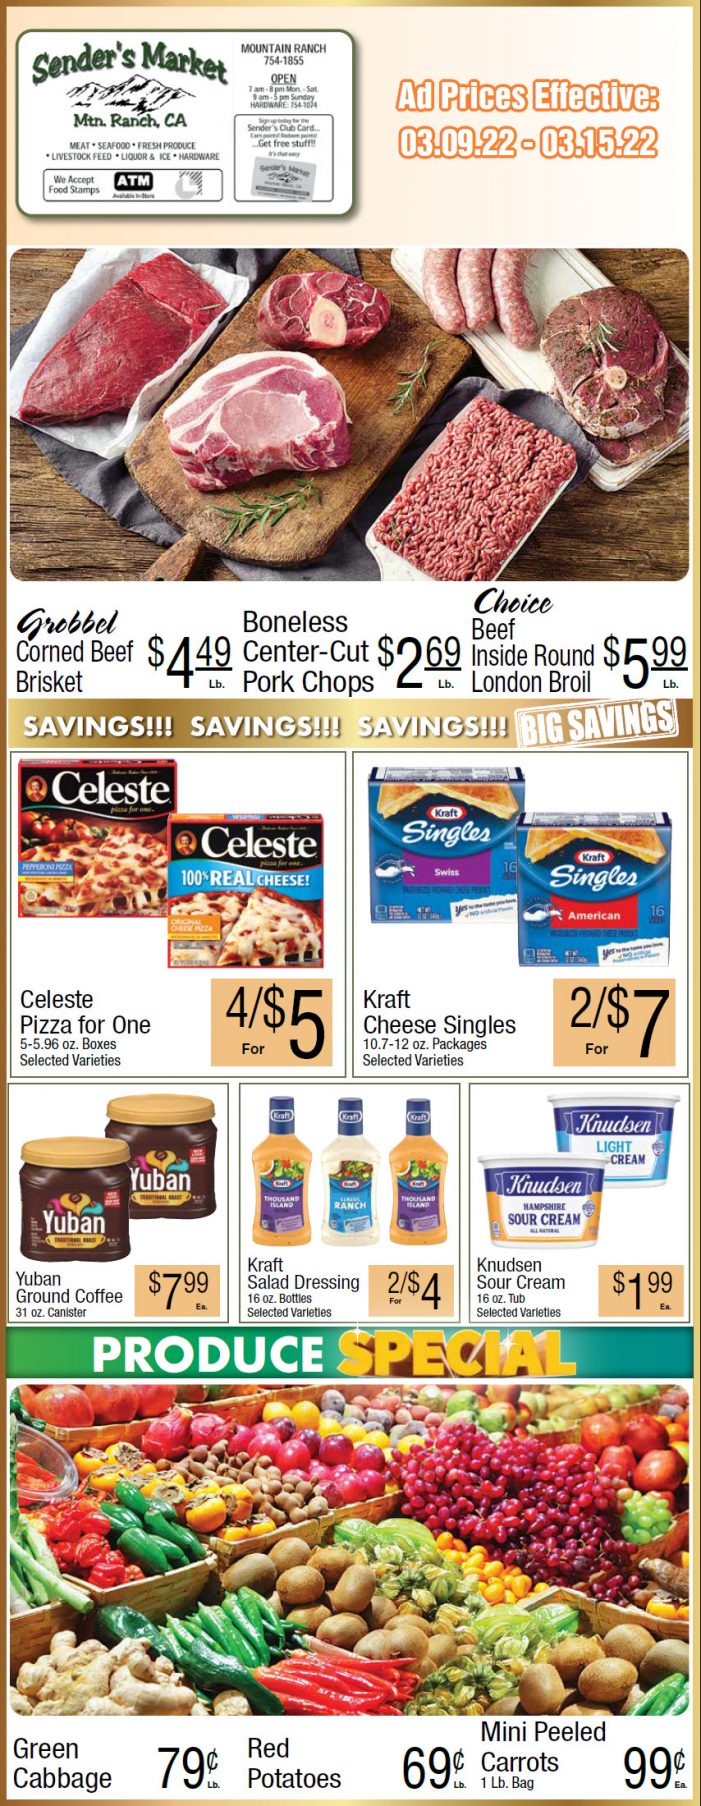 Sender’s Market’s Weekly Ad & Grocery Specials March 9th ~ March 15th! Shop Local & Save!